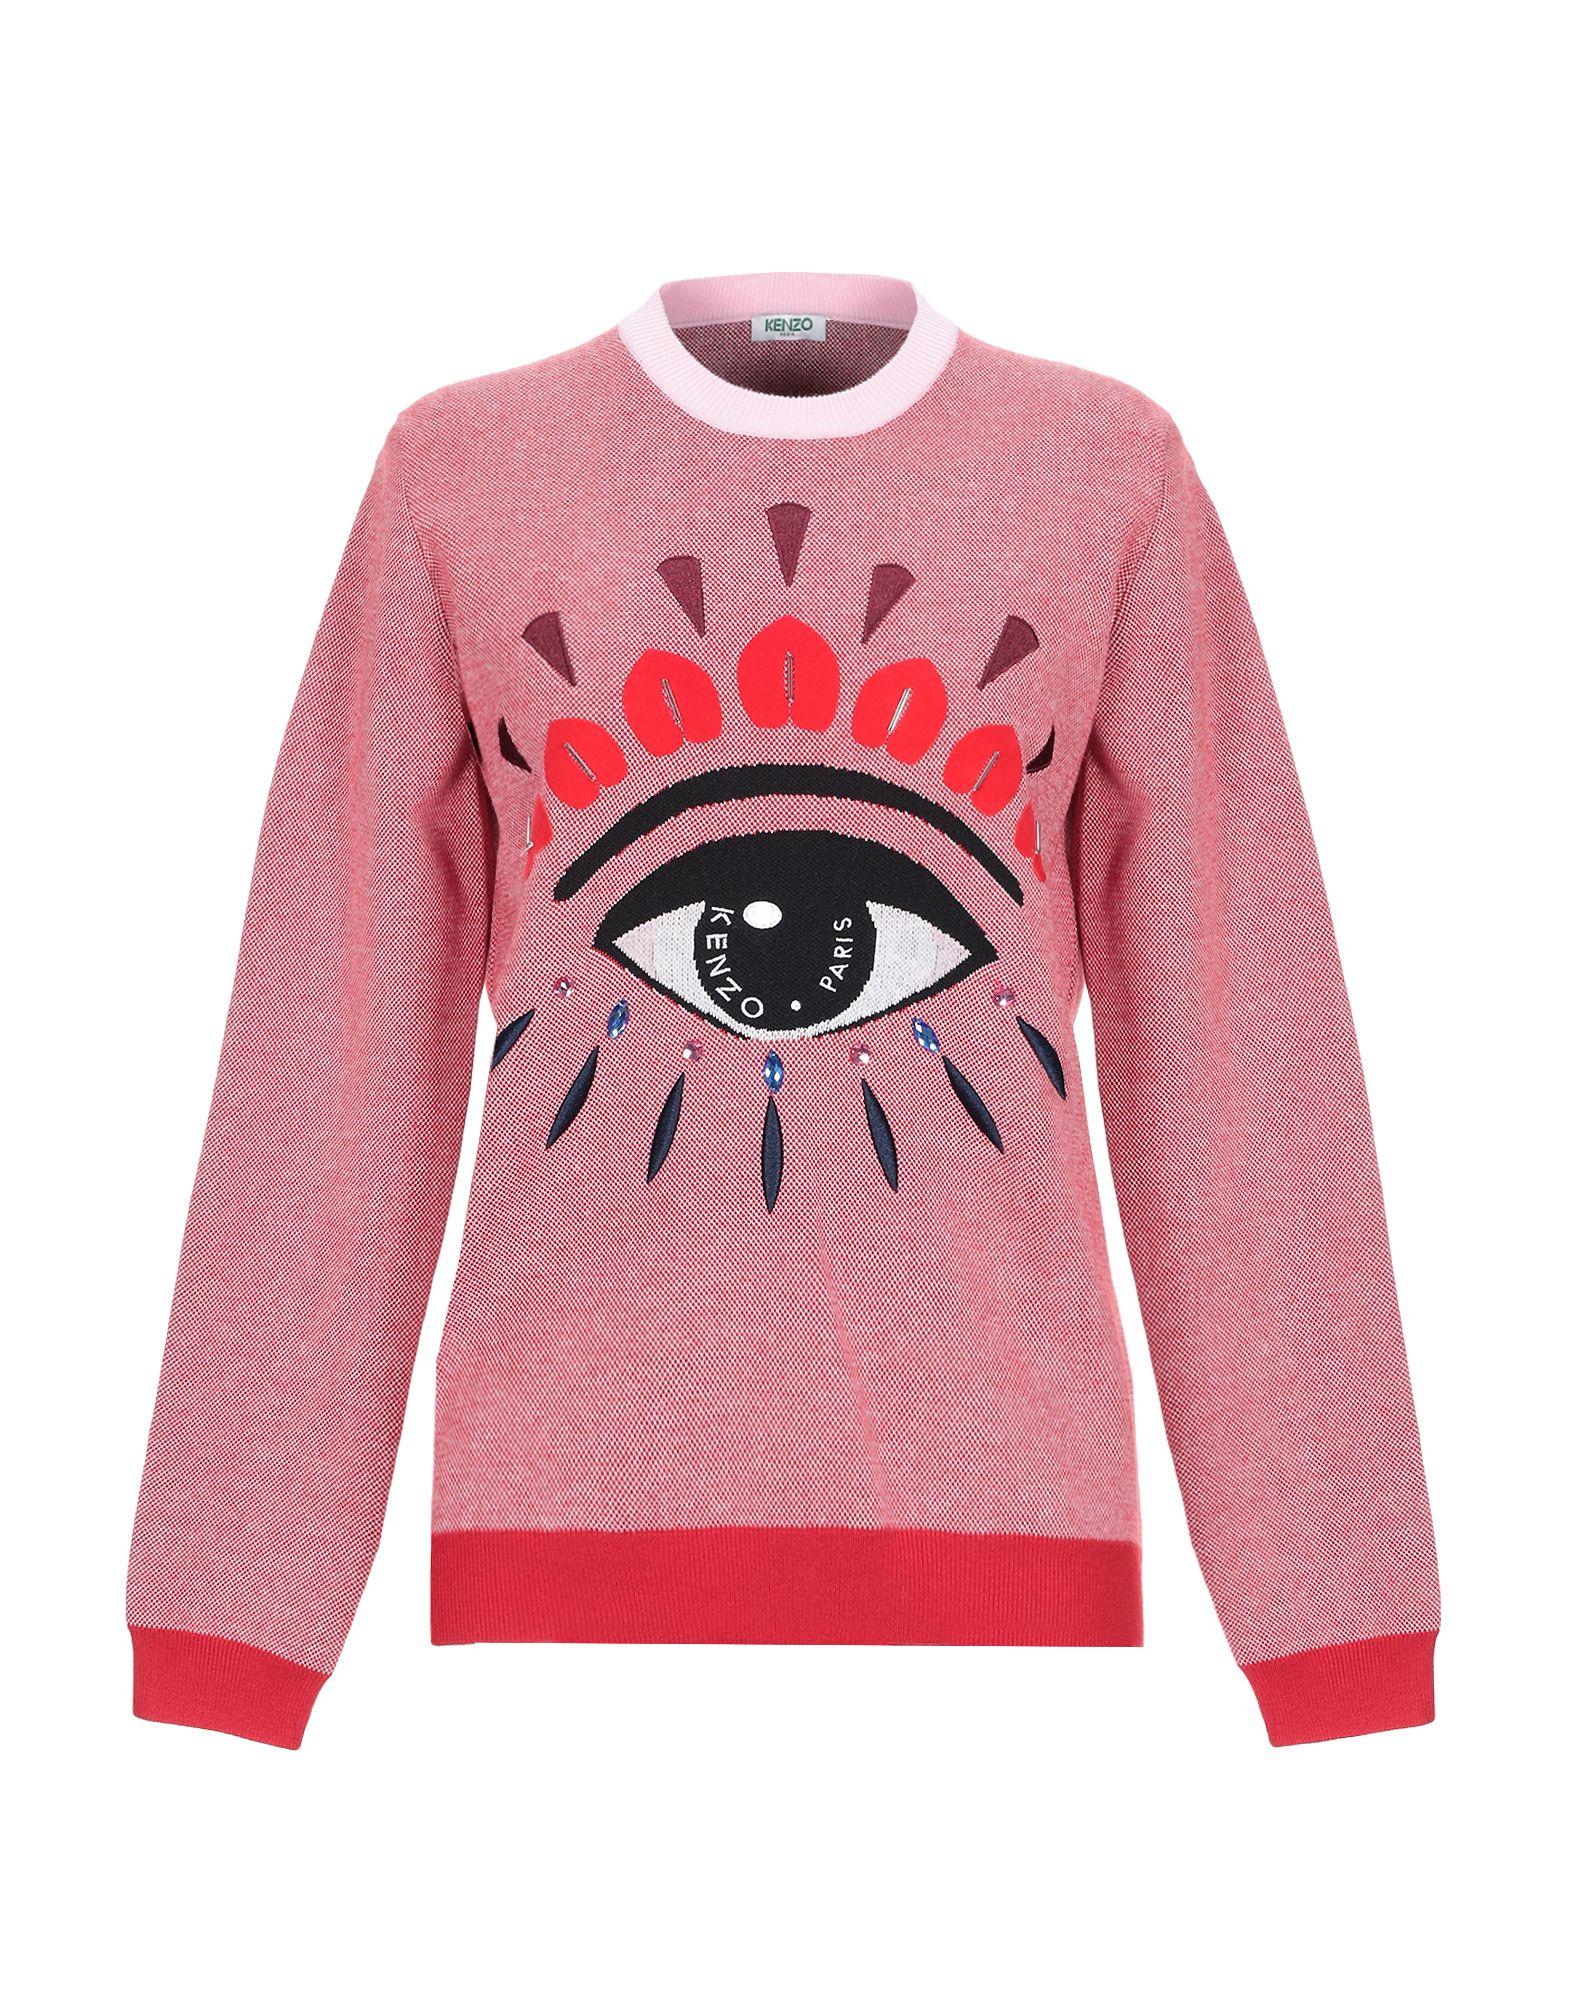 KENZO Synthetic Jumper in Red - Lyst